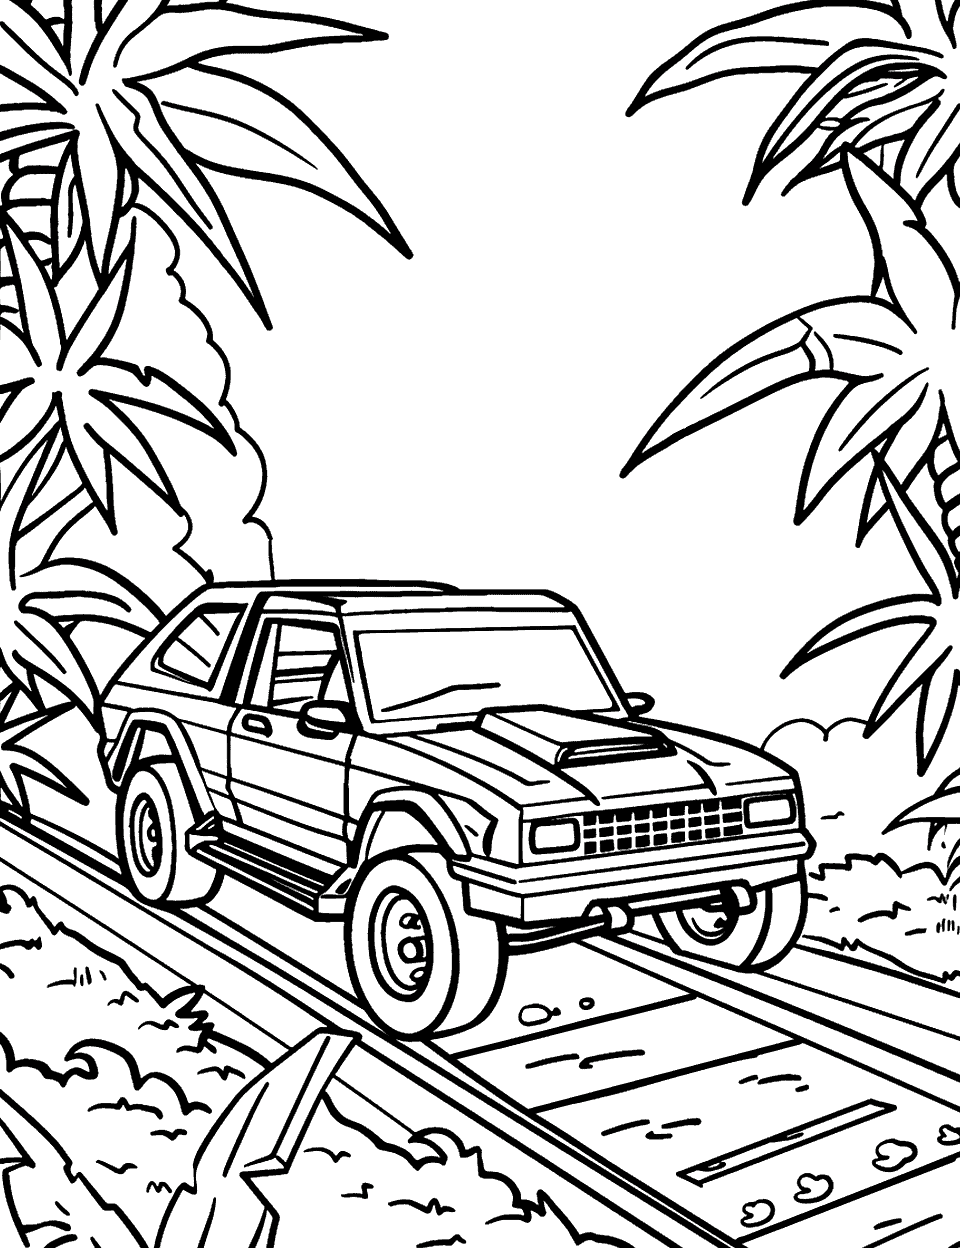 Dinosaur Discovery Expedition Coloring Page - A Hot Wheels car on a jungle track.